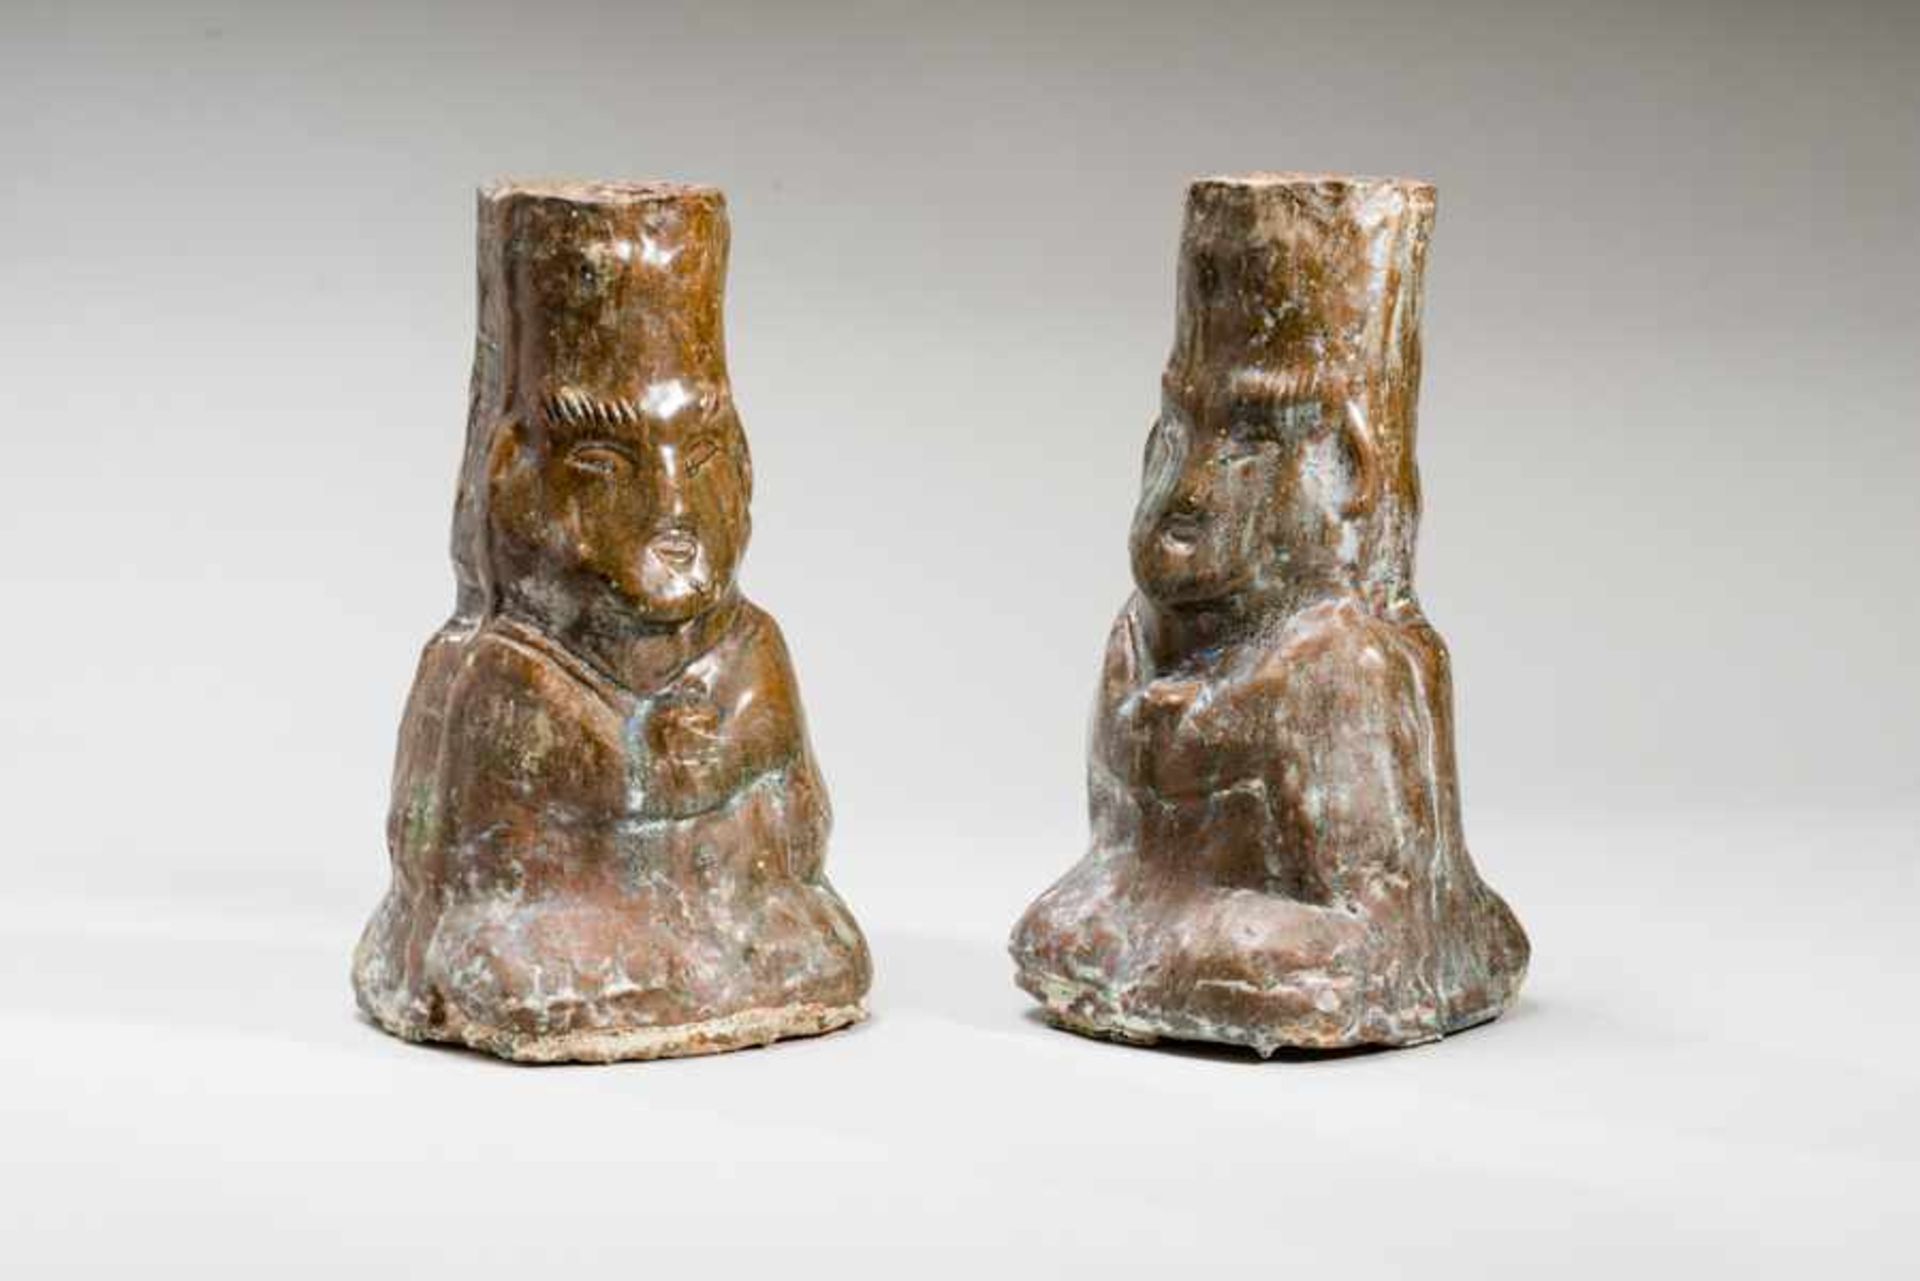 PAIR OF FIGURE-SHAPED OIL LAMPS (DIVINITIES?) Glazed ceramic. China, Eastern Han dynasty(25 - 220 - Image 2 of 5